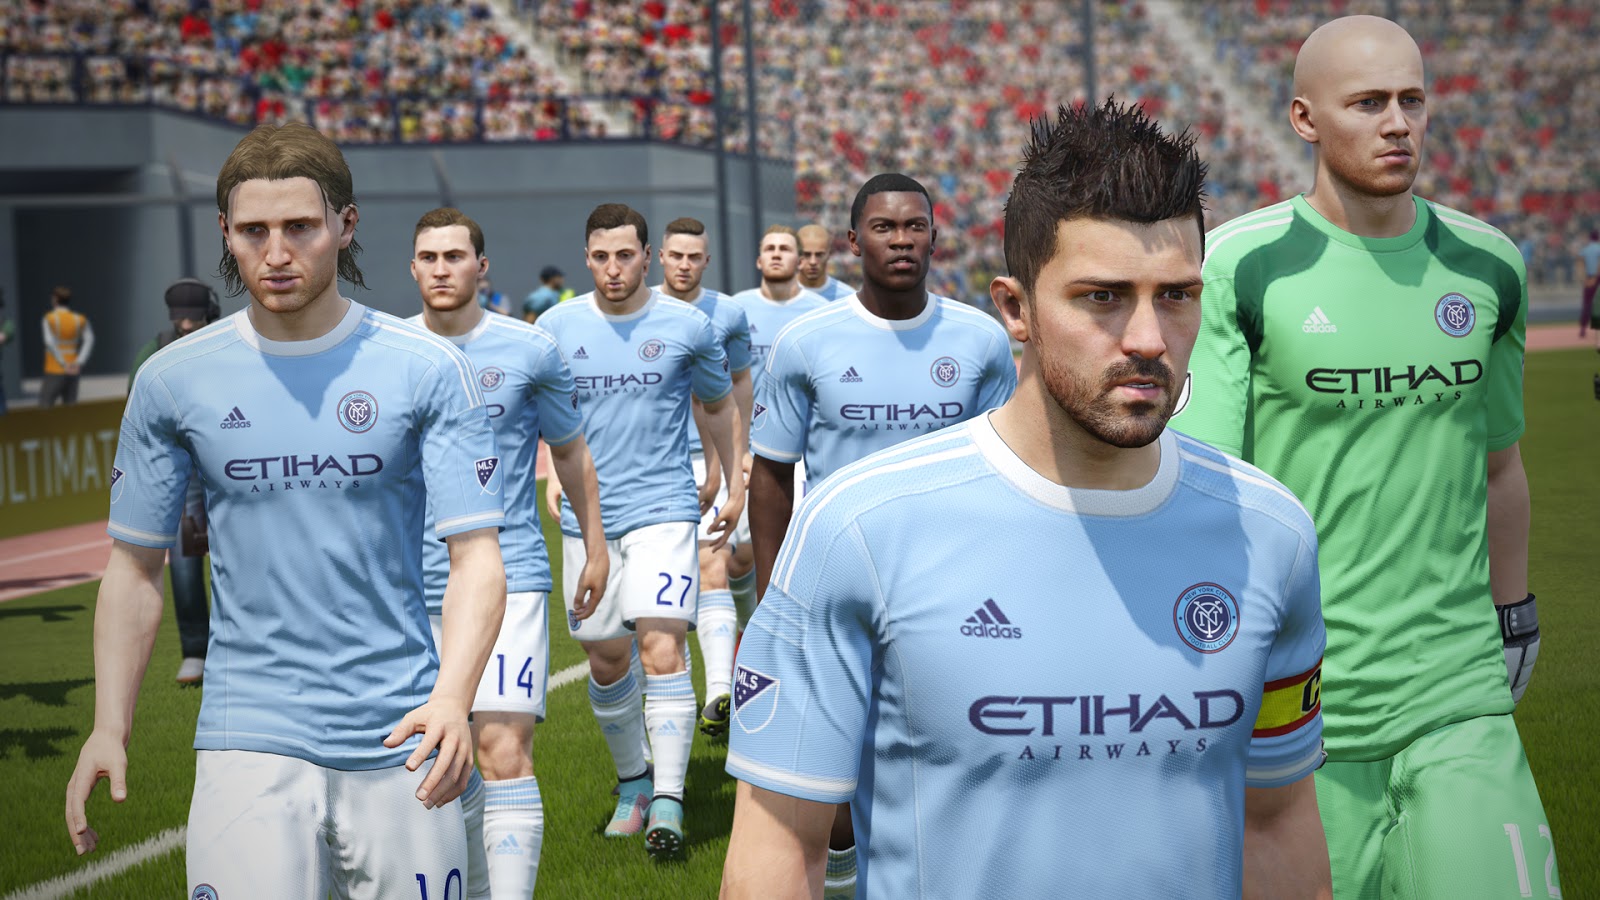 Fifa 16 Free Download Full Crack Version For PC, PS2